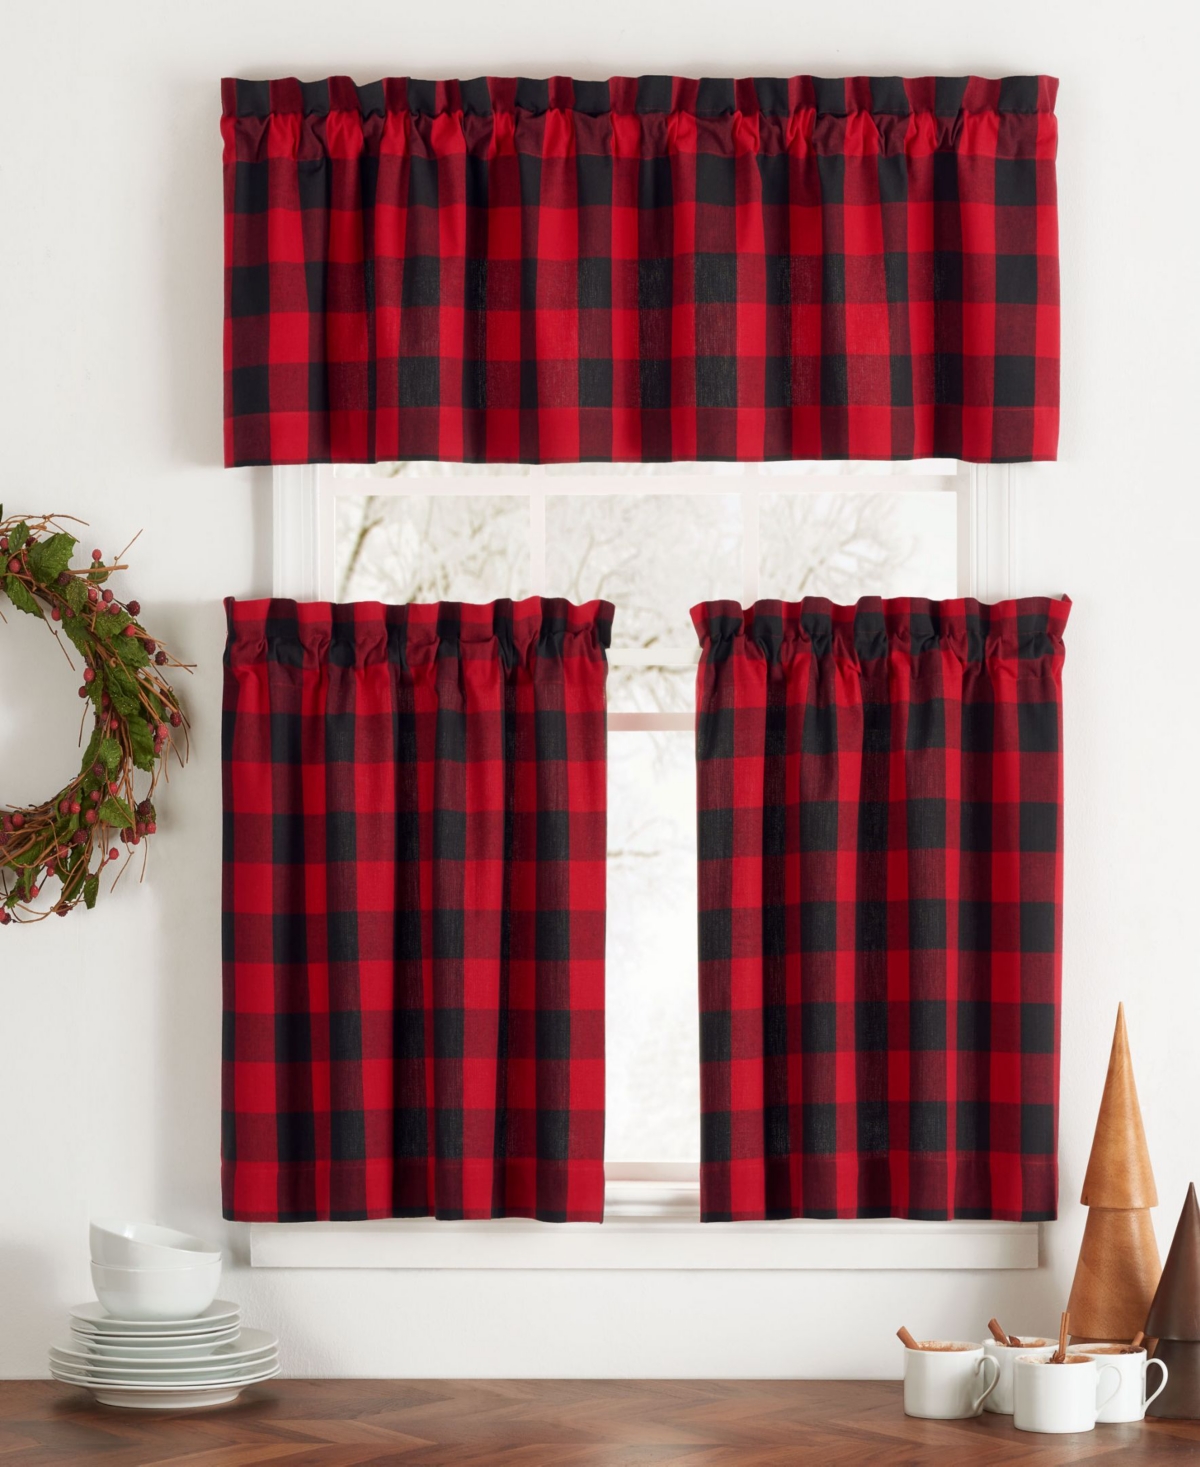 Elrene Farmhouse Living Holiday Buffalo Check Window Curtain Tier Set, 2 Piece, 30" X 24" In Red,black